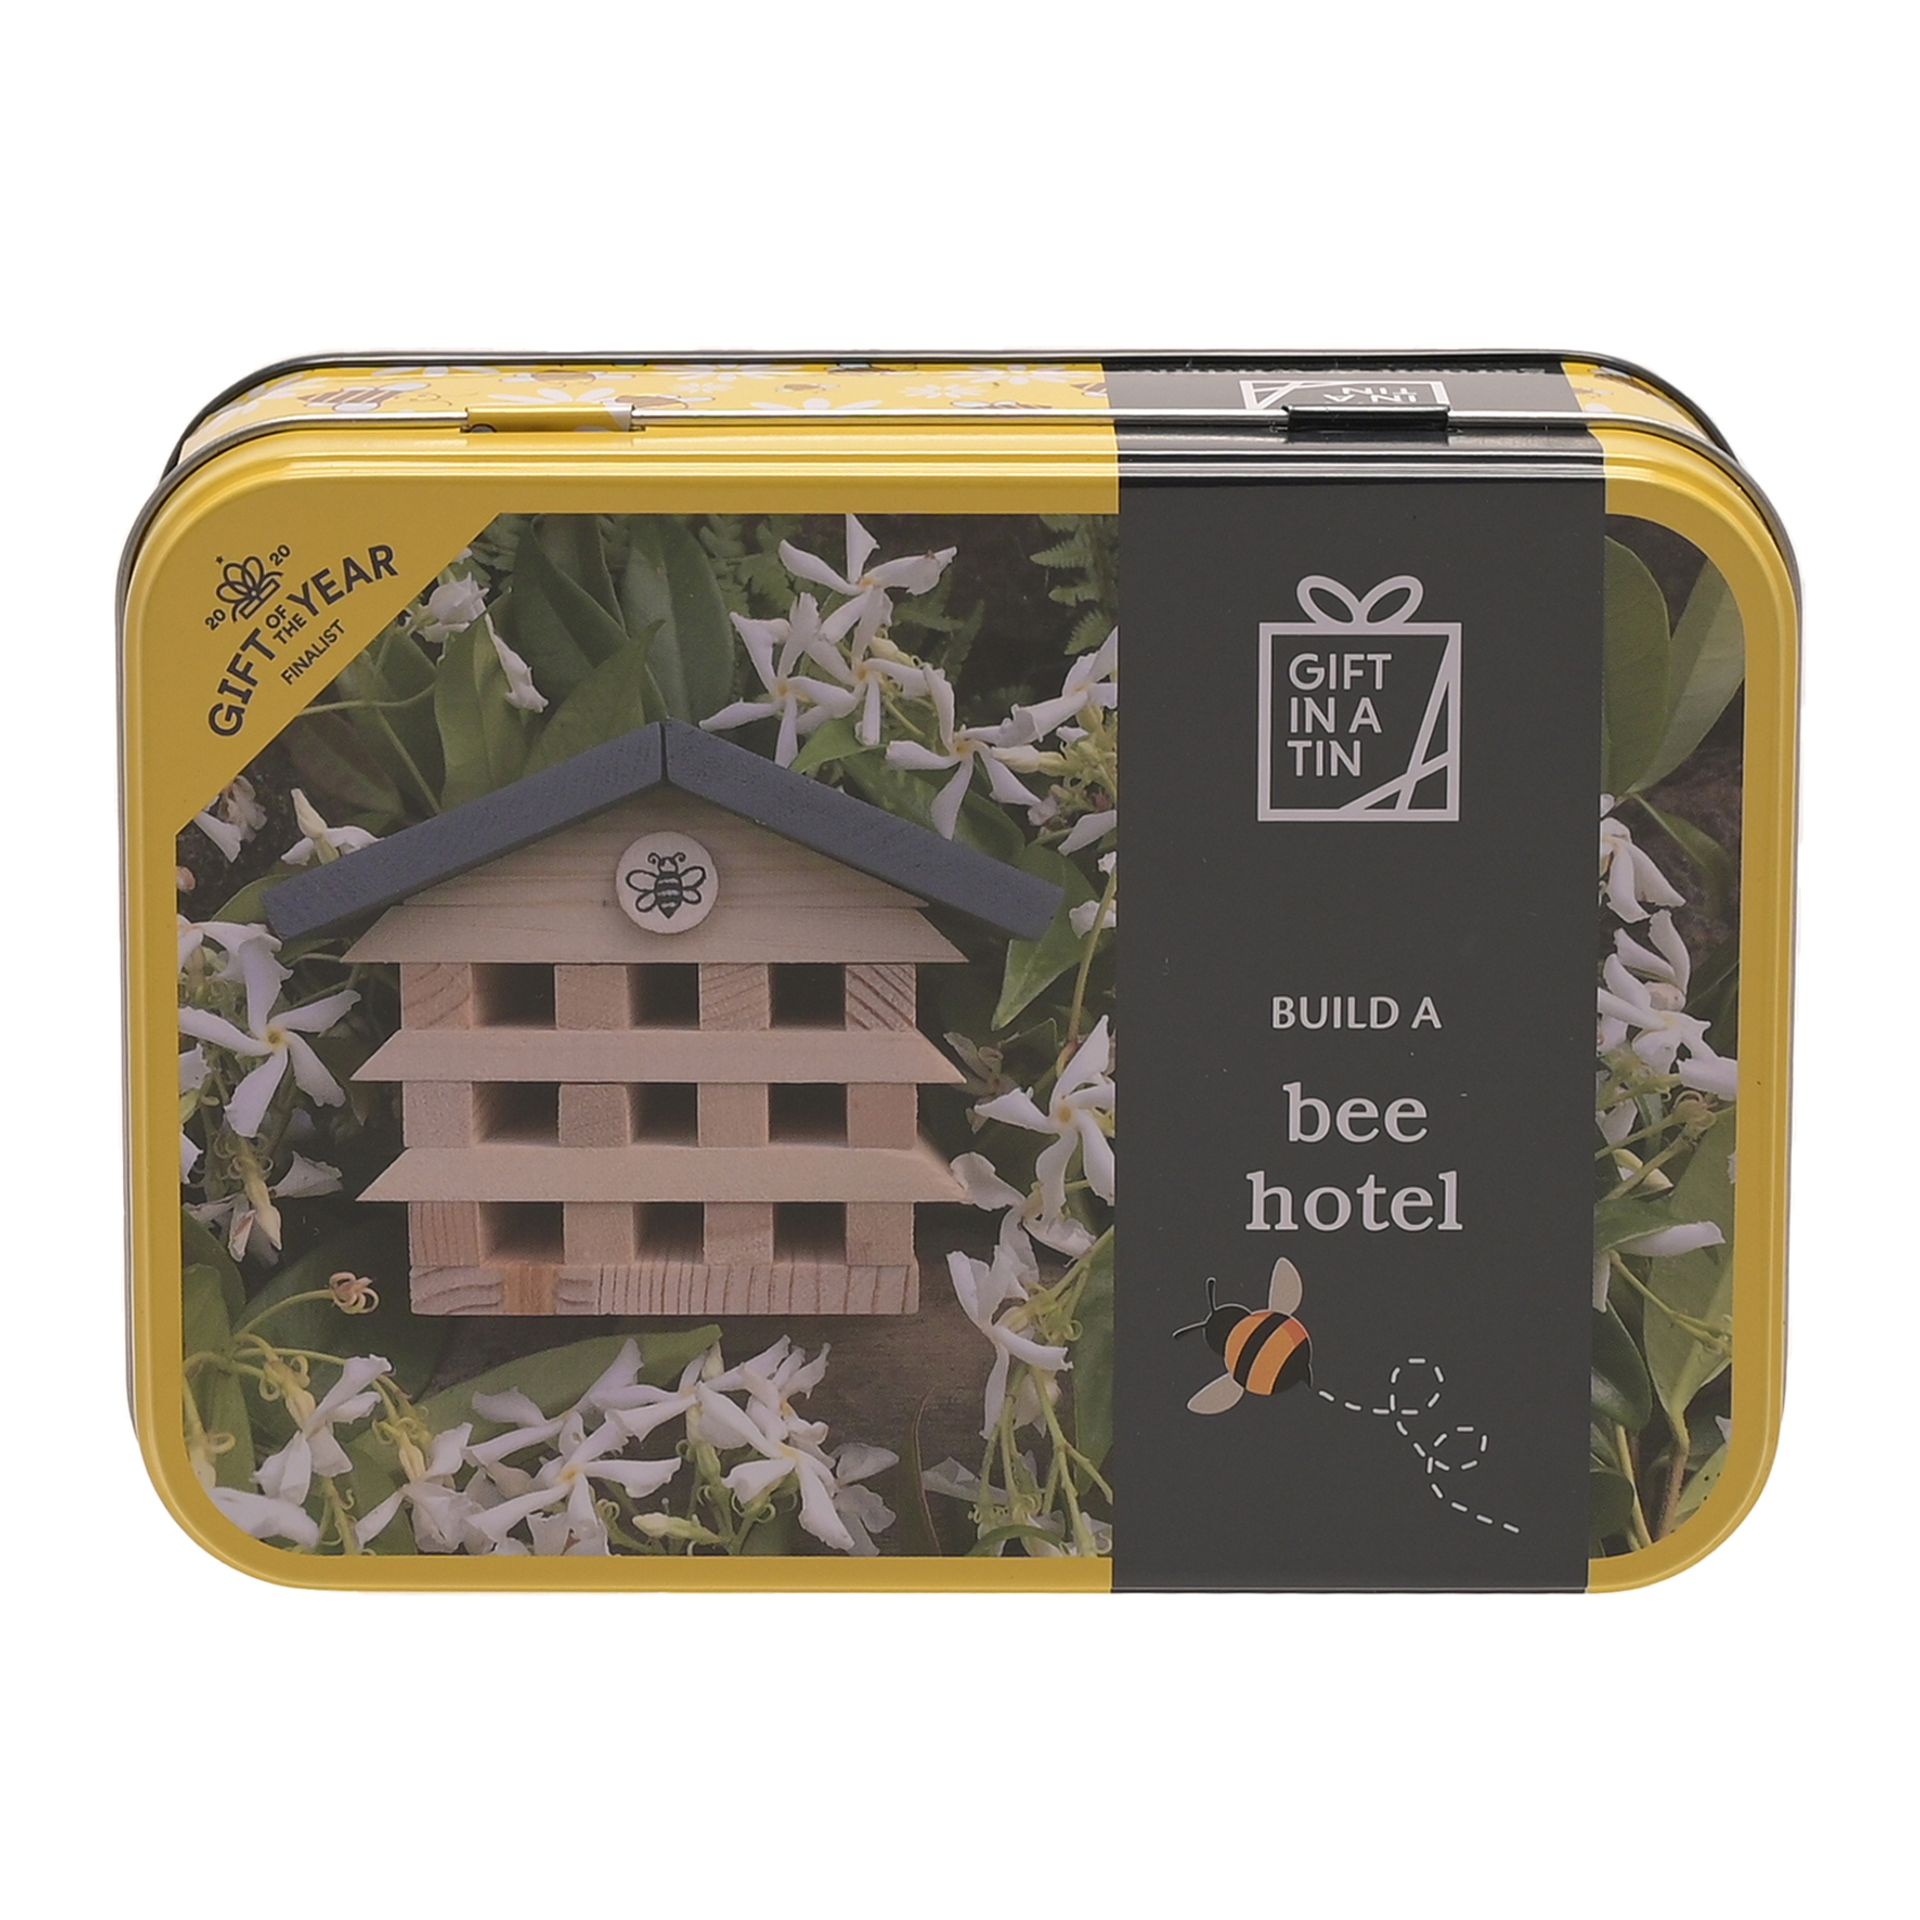 Apples to Pears Build a Bee Hotel Gift in a Tin